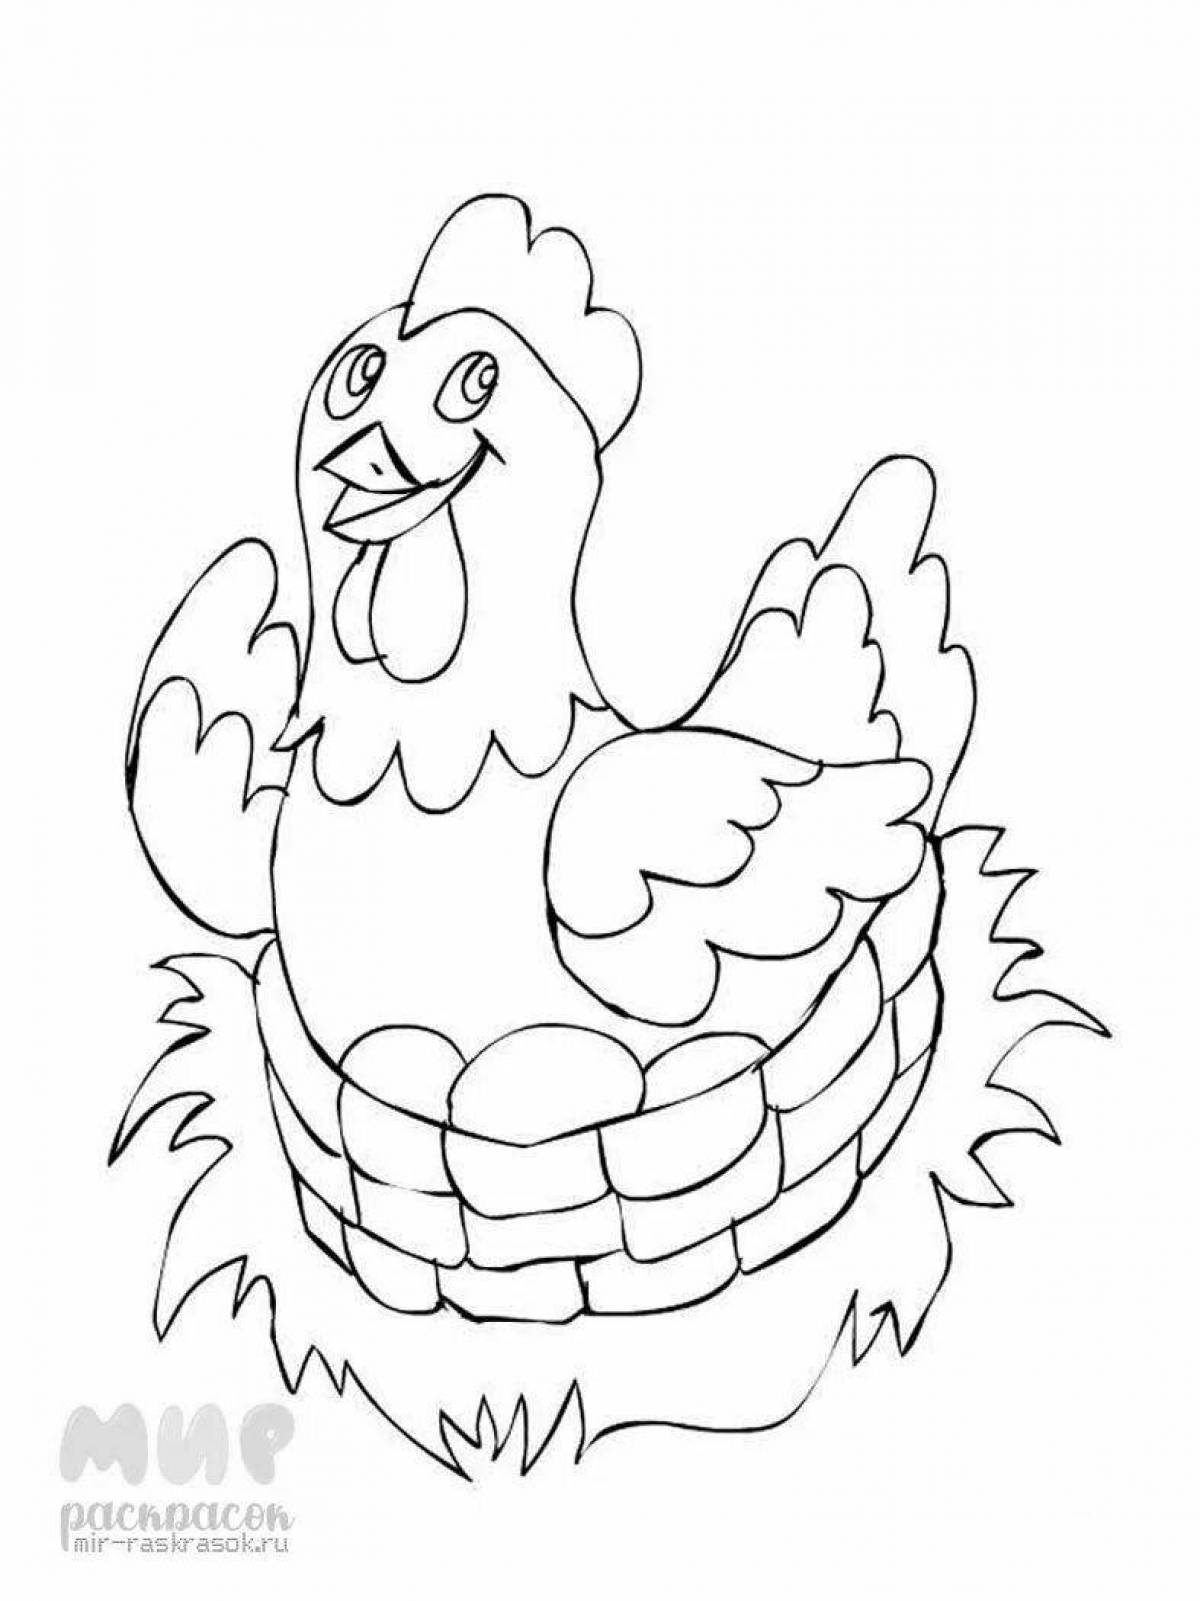 Sweet chicken pockmarked coloring page for kids